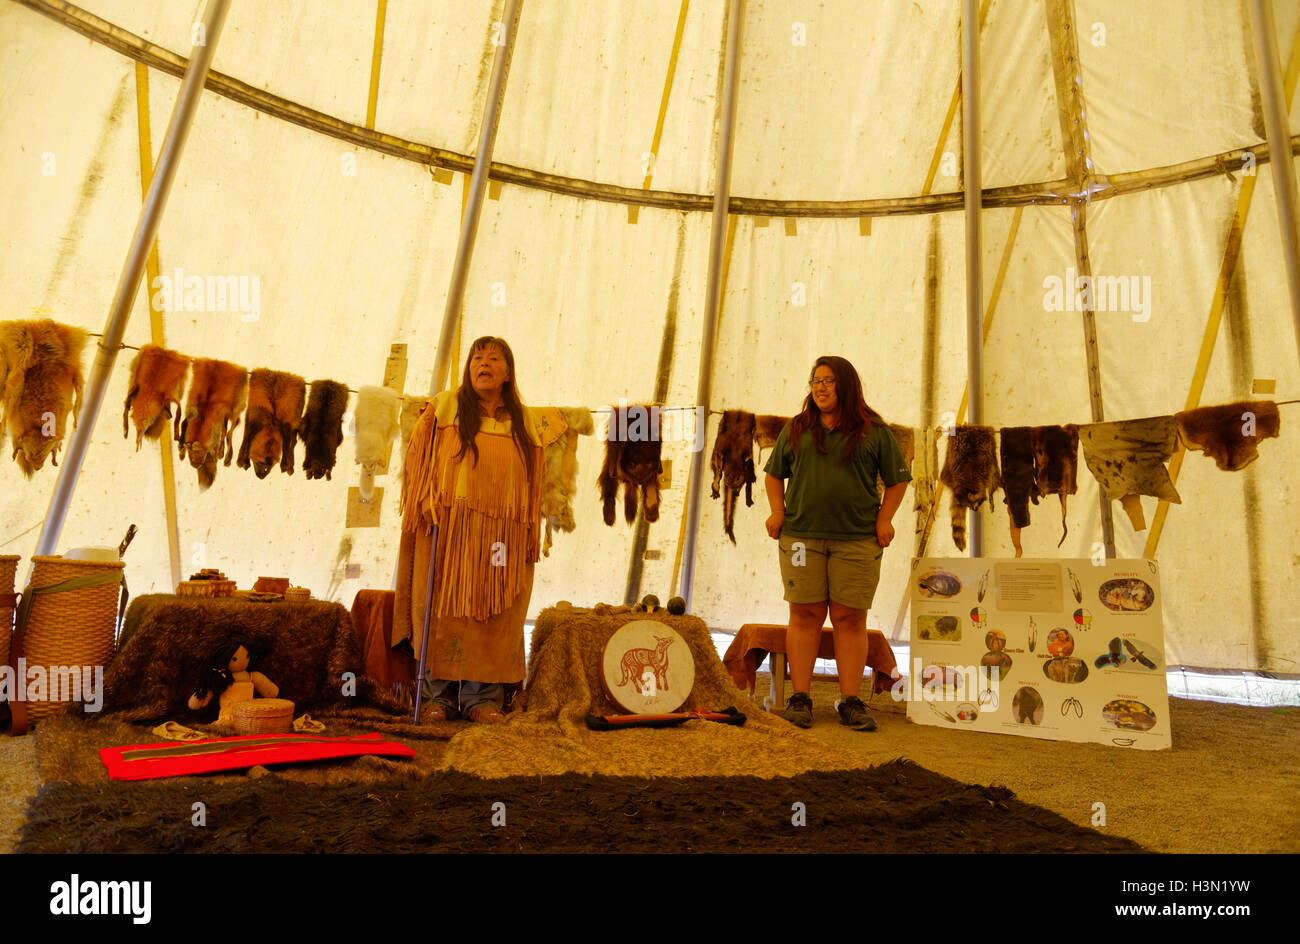 A native american (Micmac) woman speaking in a wigwam, with traditional objects & furs. Kouchibouguac NP New Brunswick Canada Stock Photo